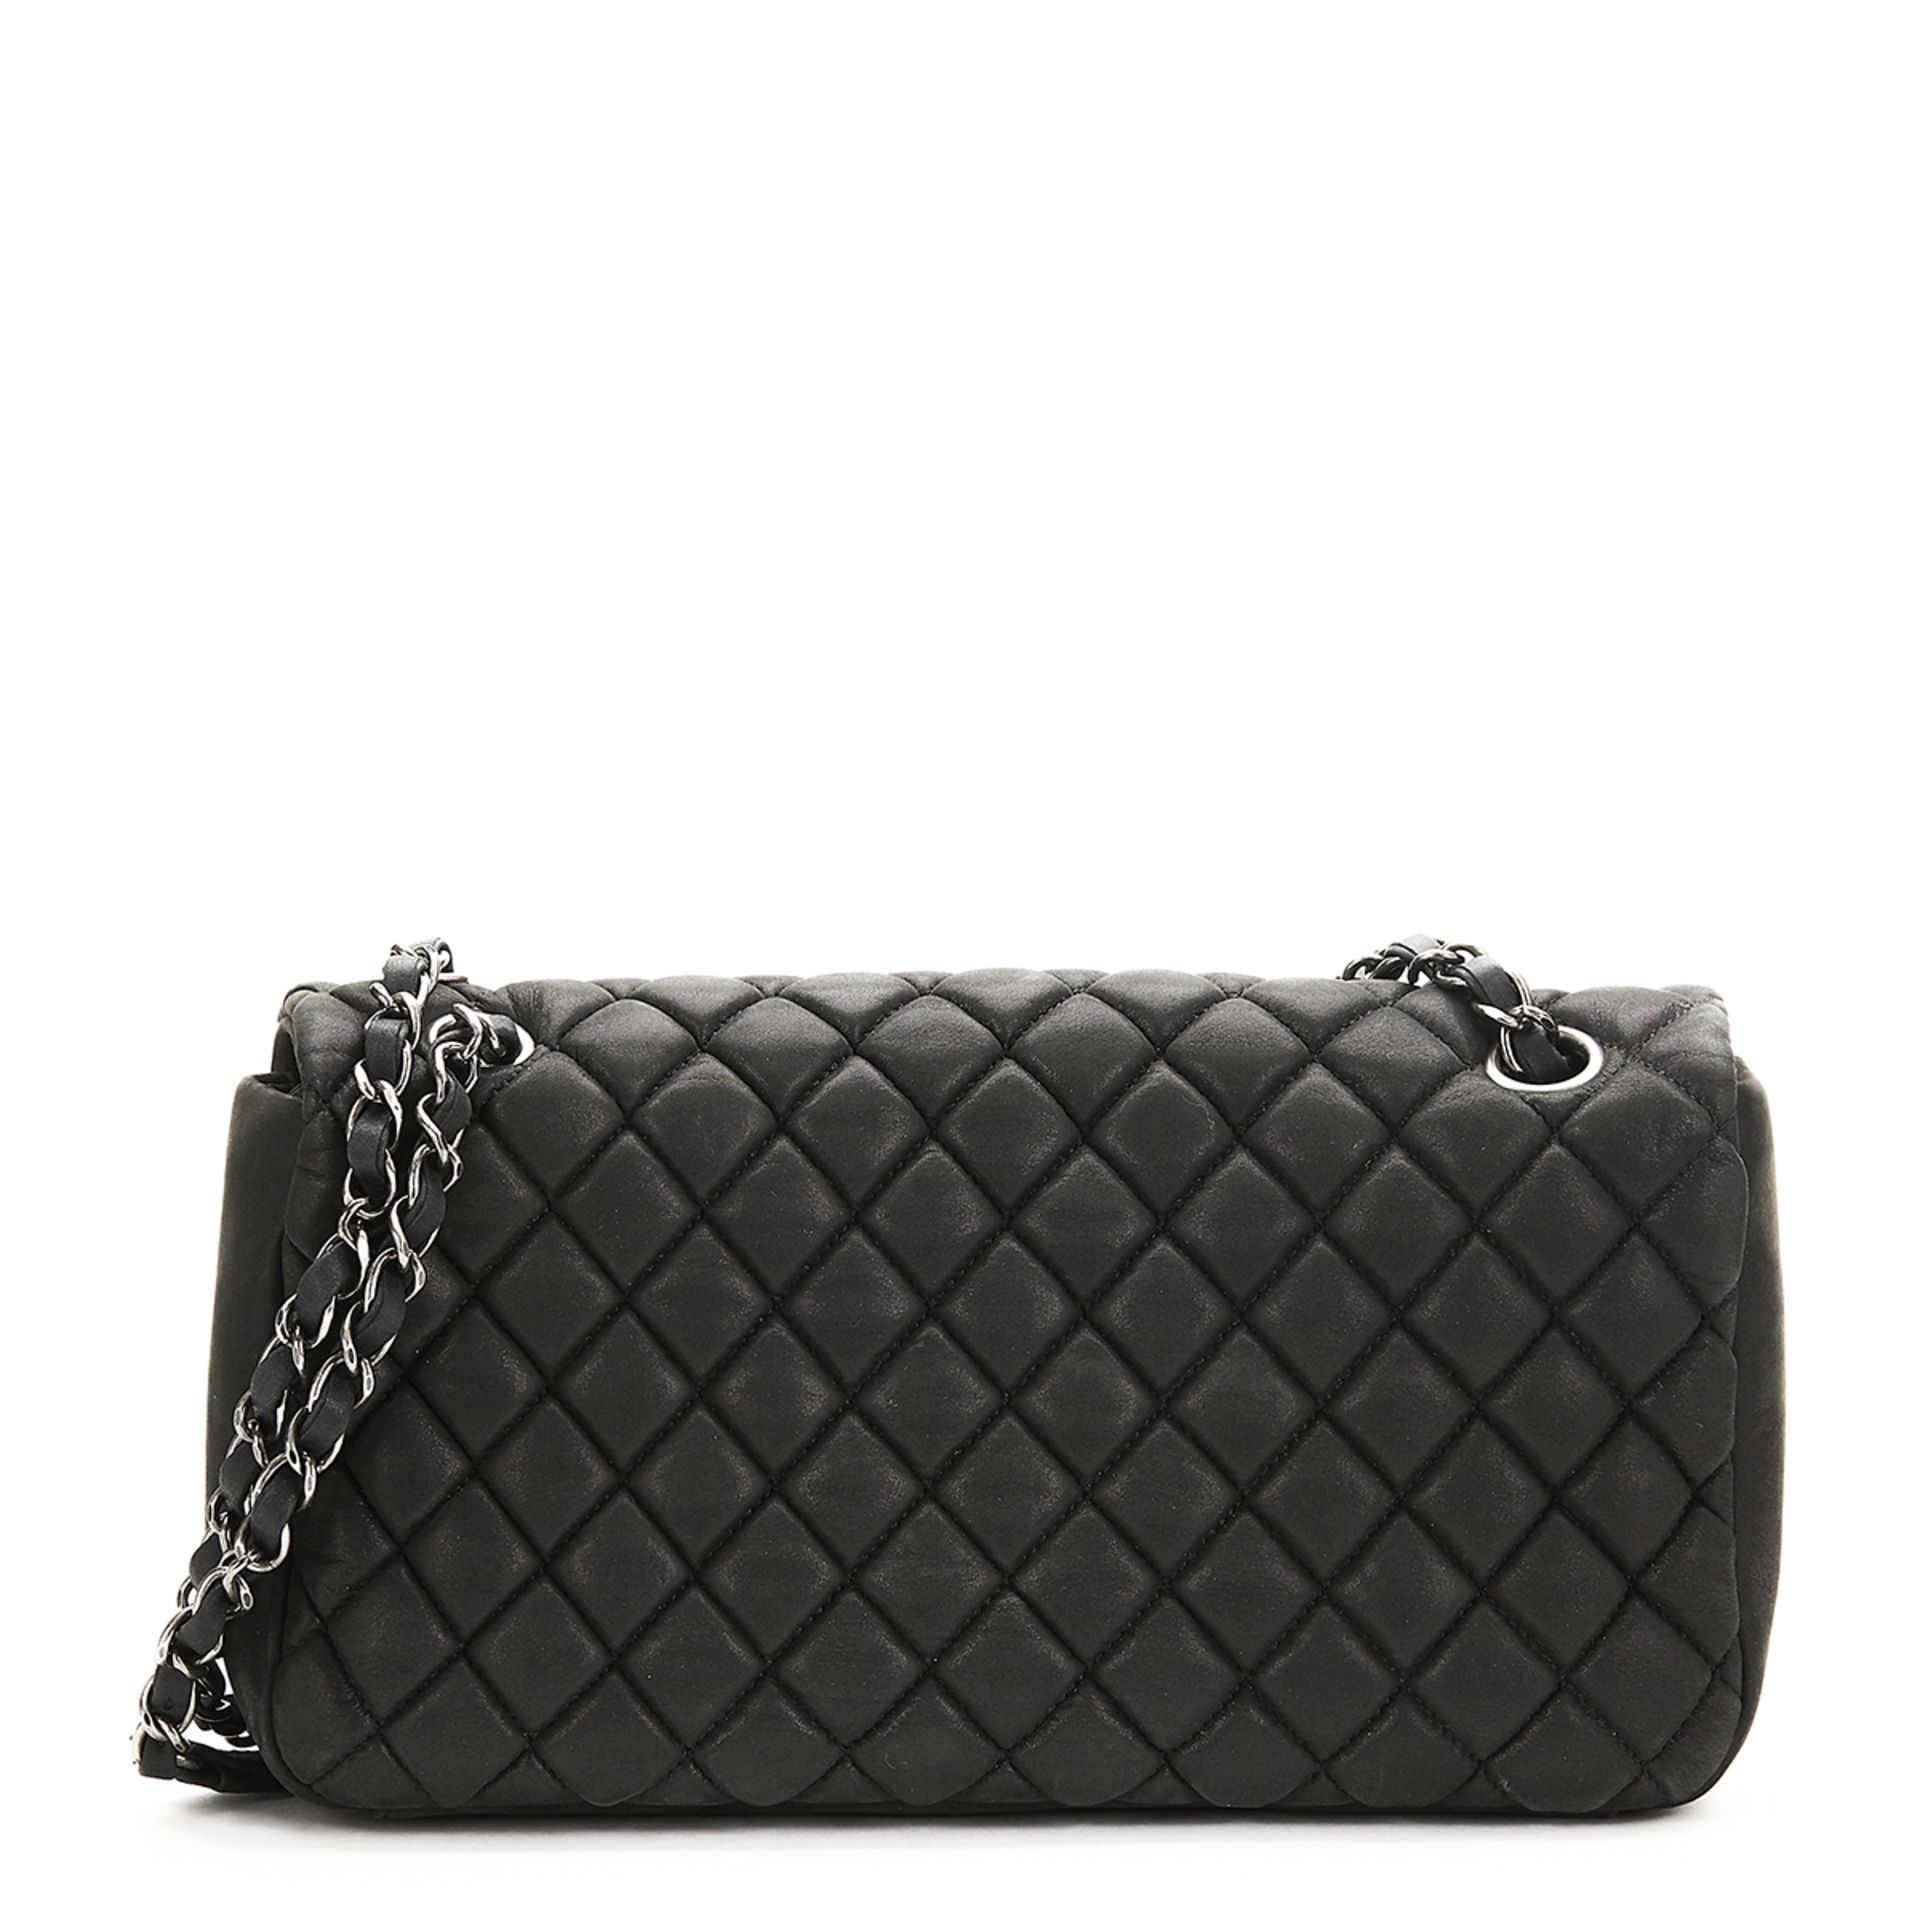 Chanel, Small Bubble Flap Bag - Image 4 of 10